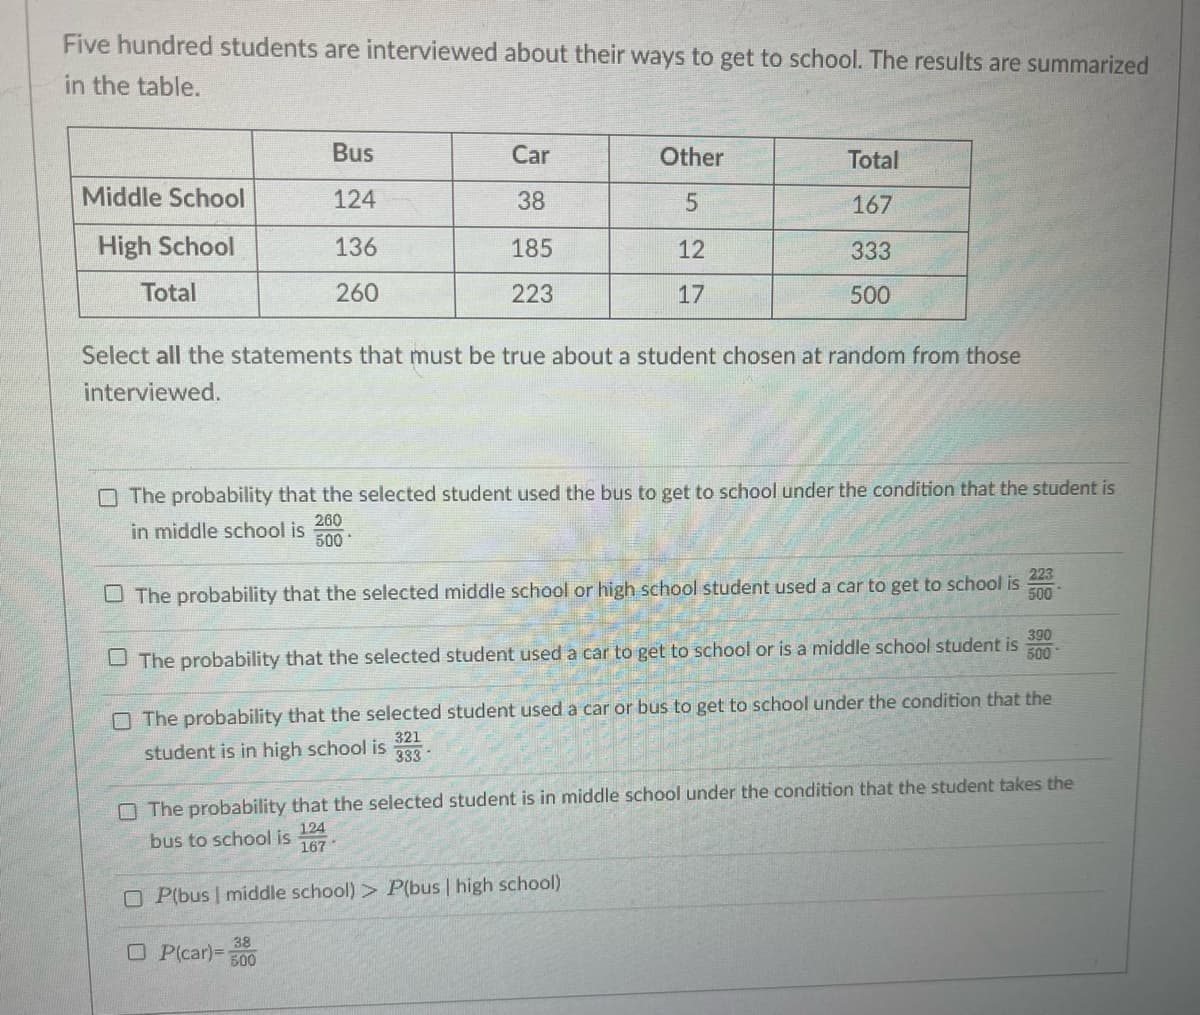 Five hundred students are interviewed about their ways to get to school. The results are summarized
in the table.
Bus
Car
Other
Total
Middle School
124
38
167
High School
136
185
12
333
Total
260
223
17
500
Select all the statements that must be true about a student chosen at random from those
interviewed.
O The probability that the selected student used the bus to get to school under the condition that the student is
260
in middle school is
500
223
O The probability that the selected middle school or high school student used a car to get to school is
500
390
U The probability that the selected student used a car to get to school or is a middle school student is
500
O The probability that the selected student used a car or bus to get to school under the condition that the
321
student is in high school is
333
O The probability that the selected student is in middle school under the condition that the student takes the
bus to school is 124
167
O P(bus I middle school) P(bus | high school)
38
O P(car)=
Б00
